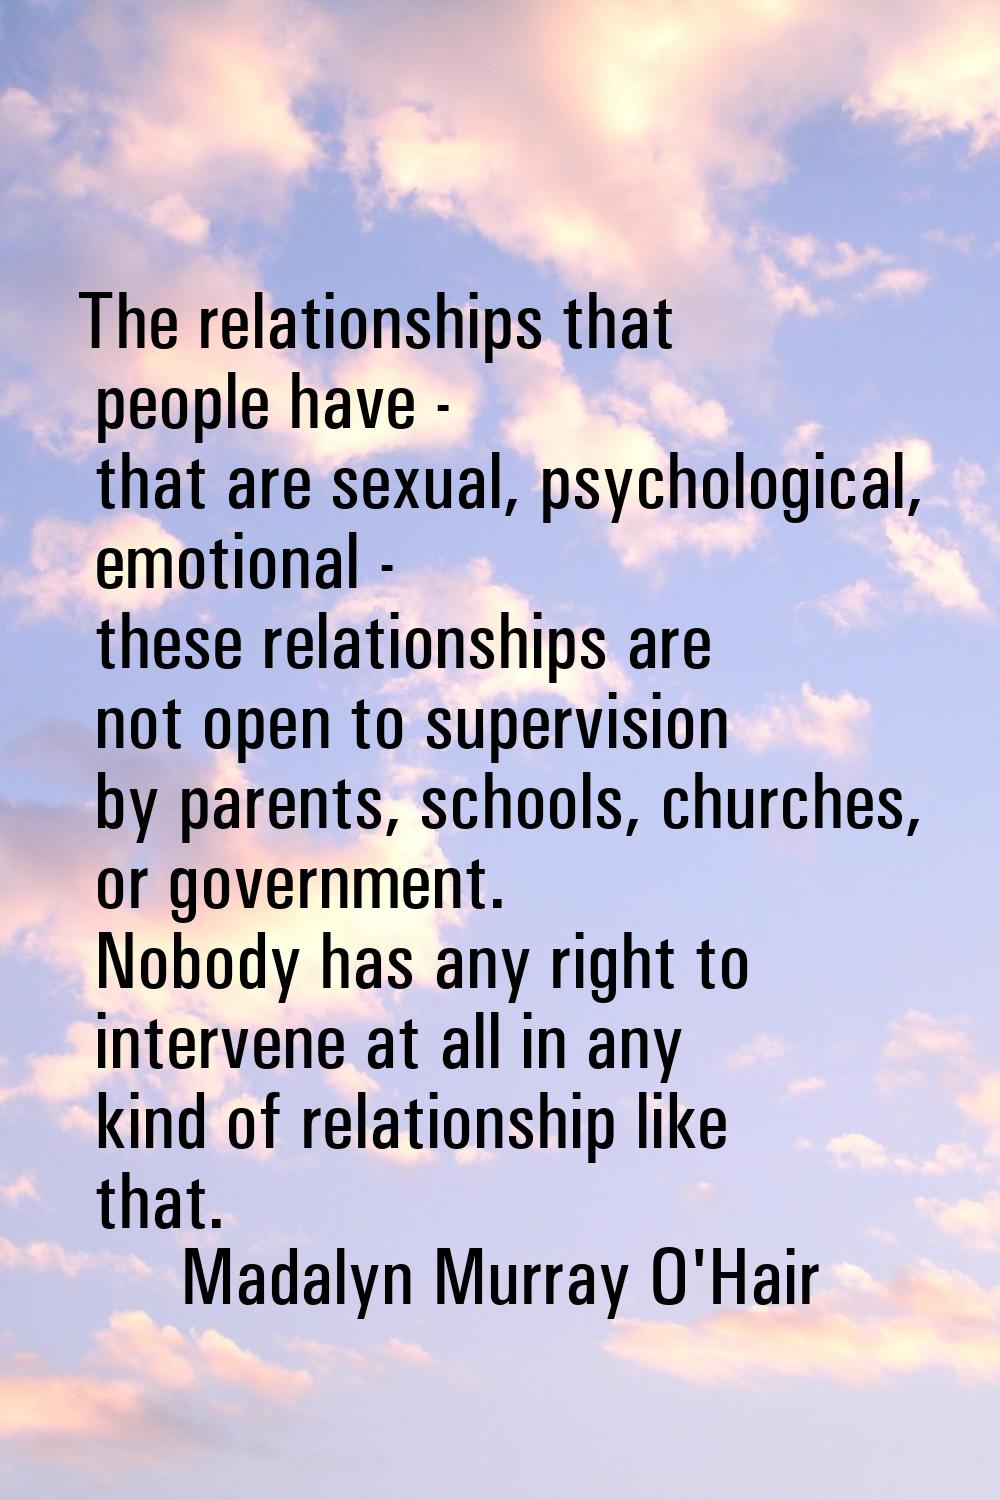 The relationships that people have - that are sexual, psychological, emotional - these relationship